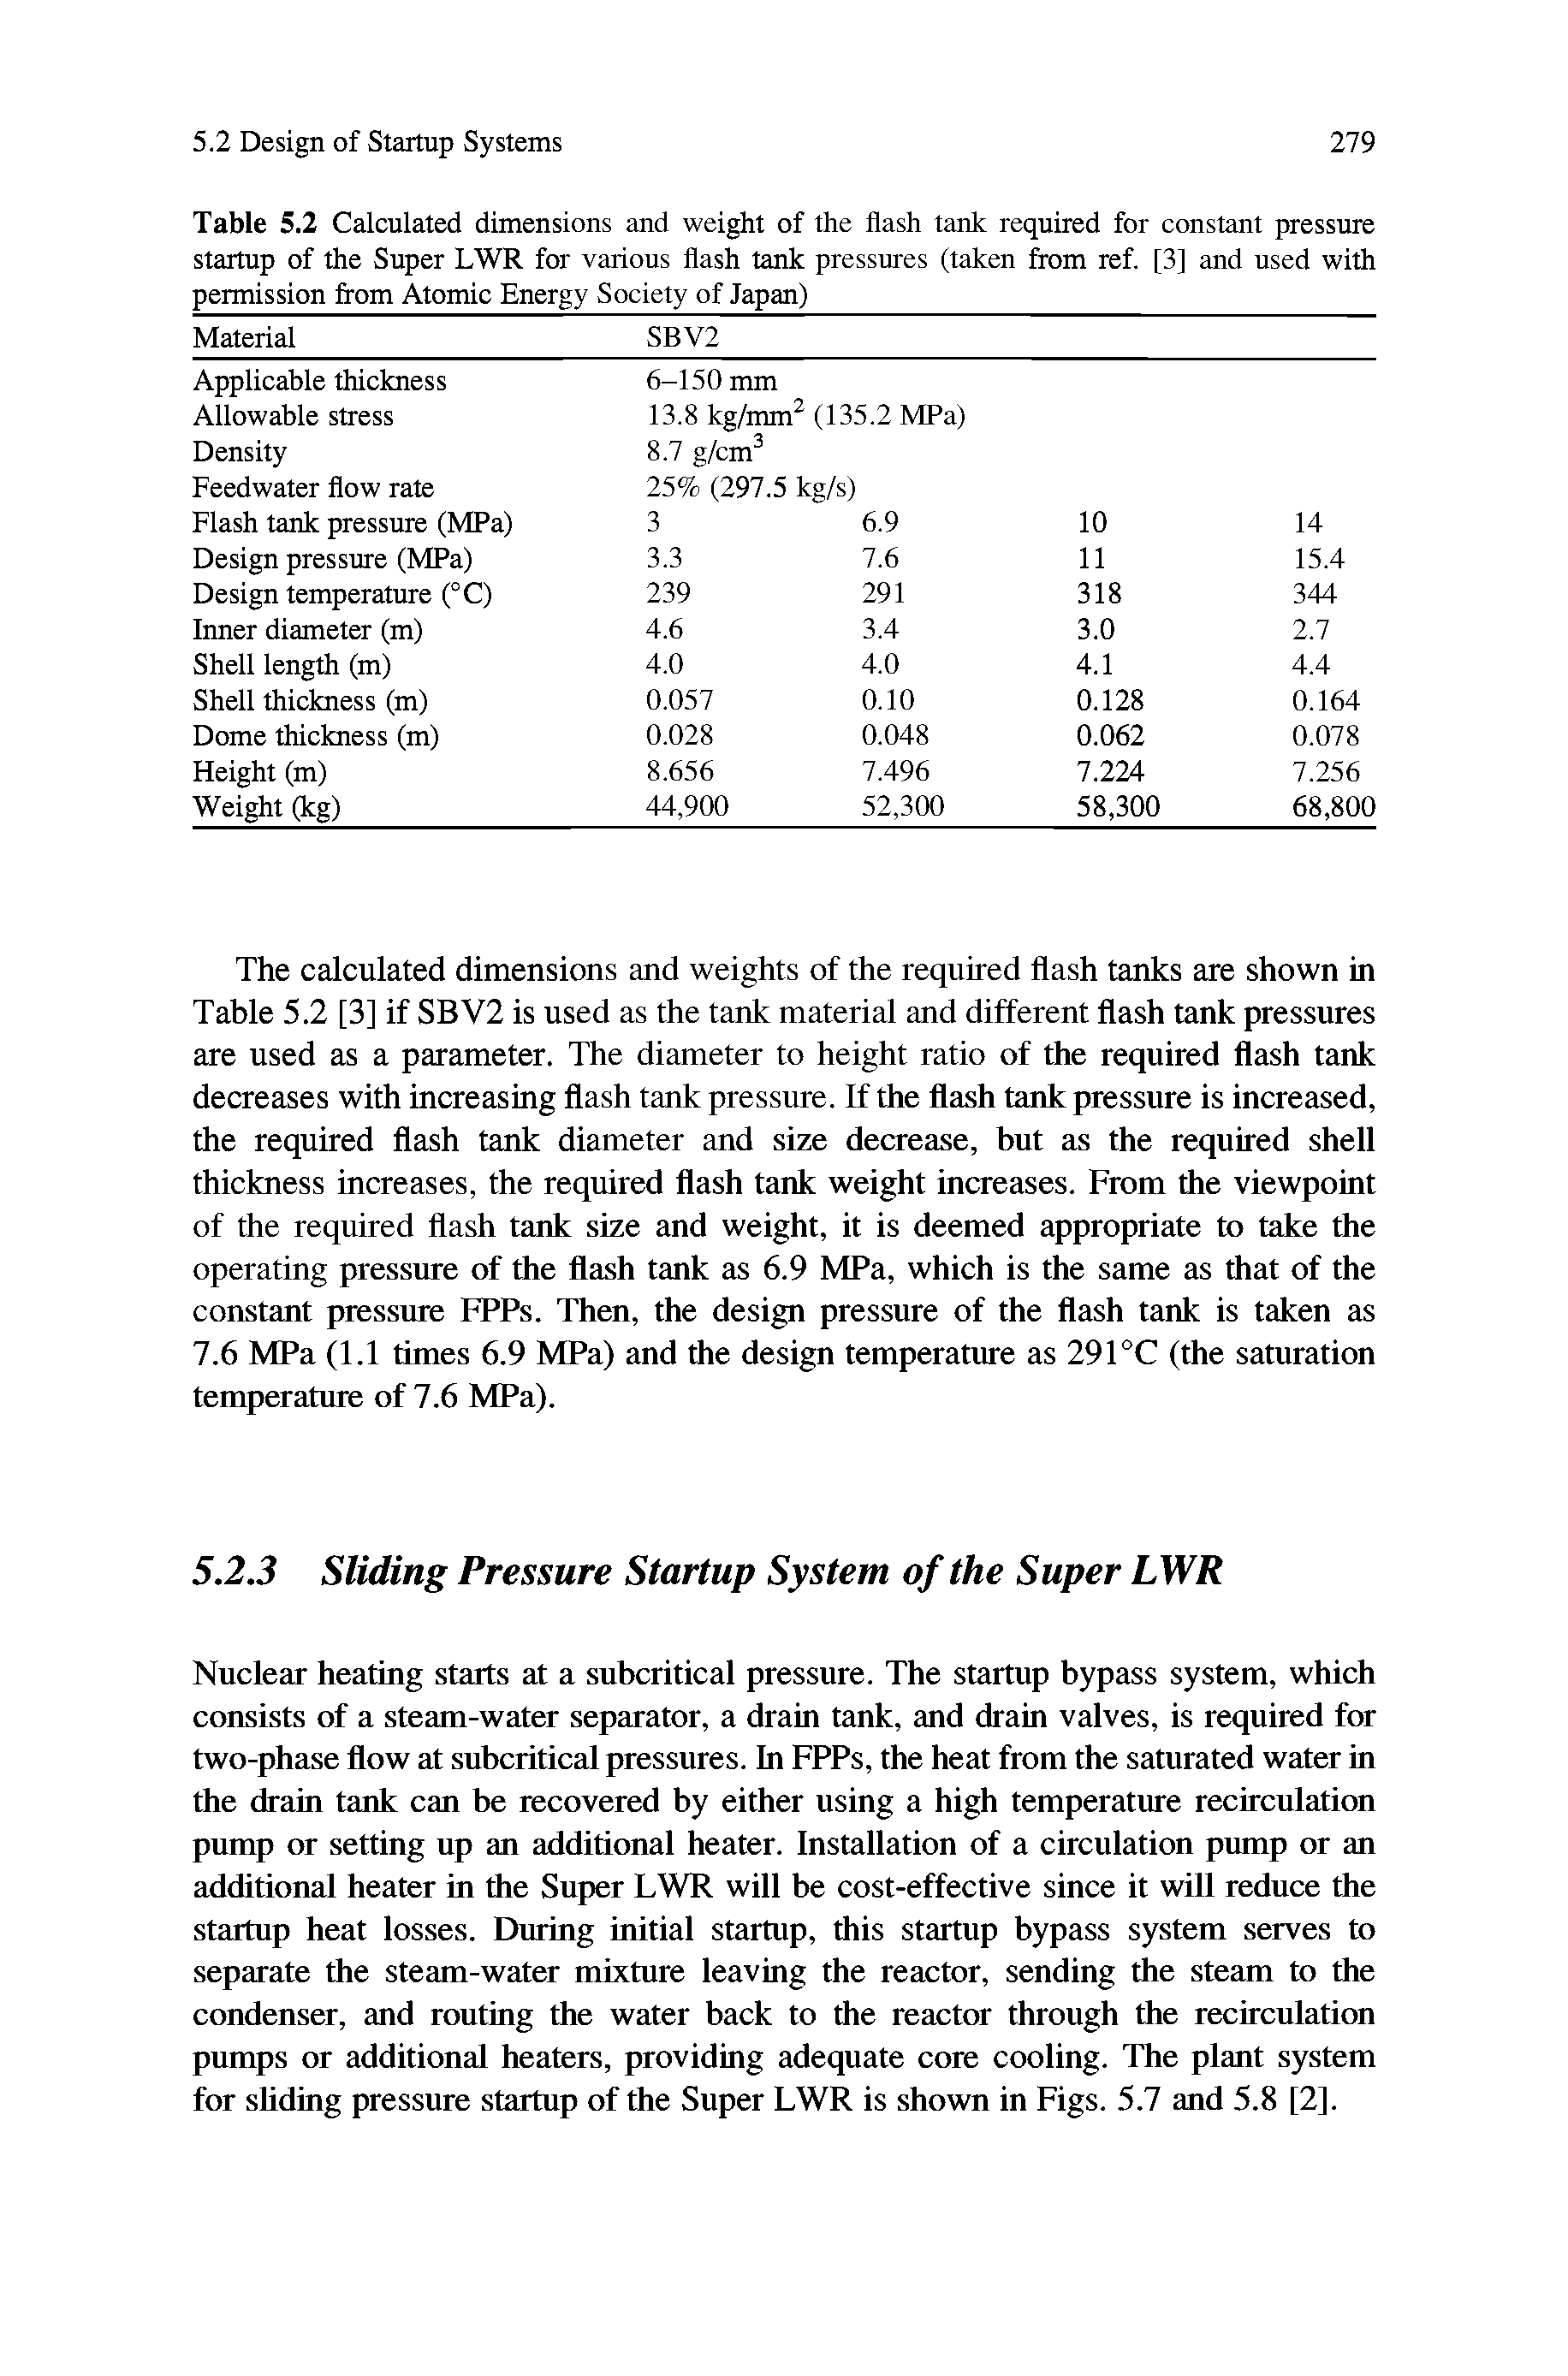 Table 5.2 Calculated dimensions and weight of the flash tank requited for constant pressure startup of the Super LWR for various flash tank pressures (taken from ref. [3] and used with permission from Atomic Energy Society of Japan)...